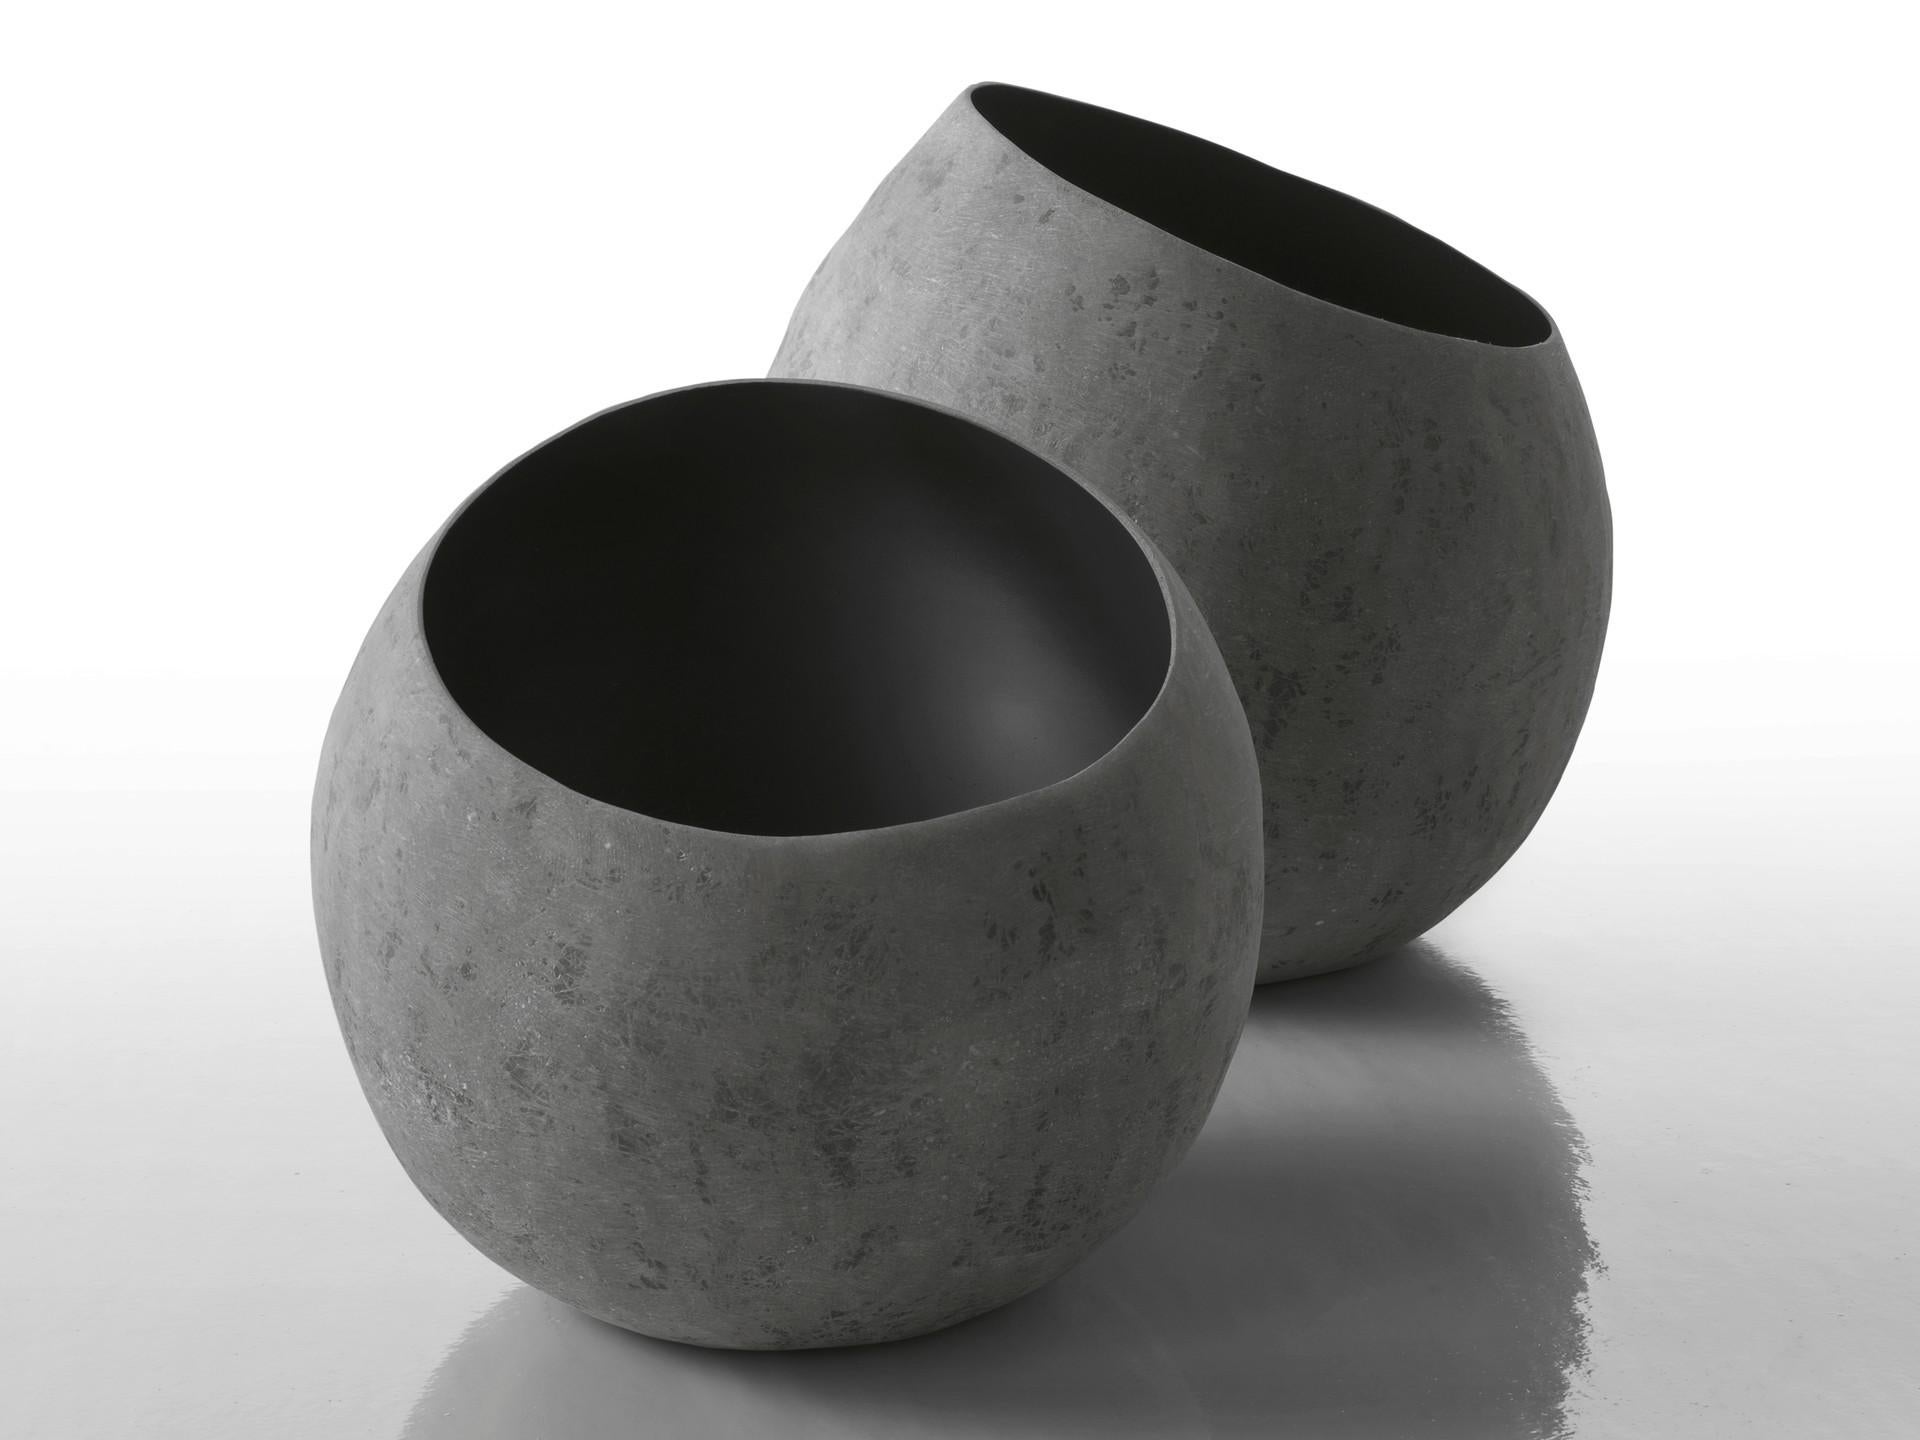 Pair of Alma Vase by Imperfettolab
Dimensions: Ø 47 x H 44 cm
Materials: Raw material


Imperfetto Lab
Who we are ? We are a family.
Verter Turroni, Emanuela Ravelli and our children Elia, Margherita and Eusebio.
All together, we are